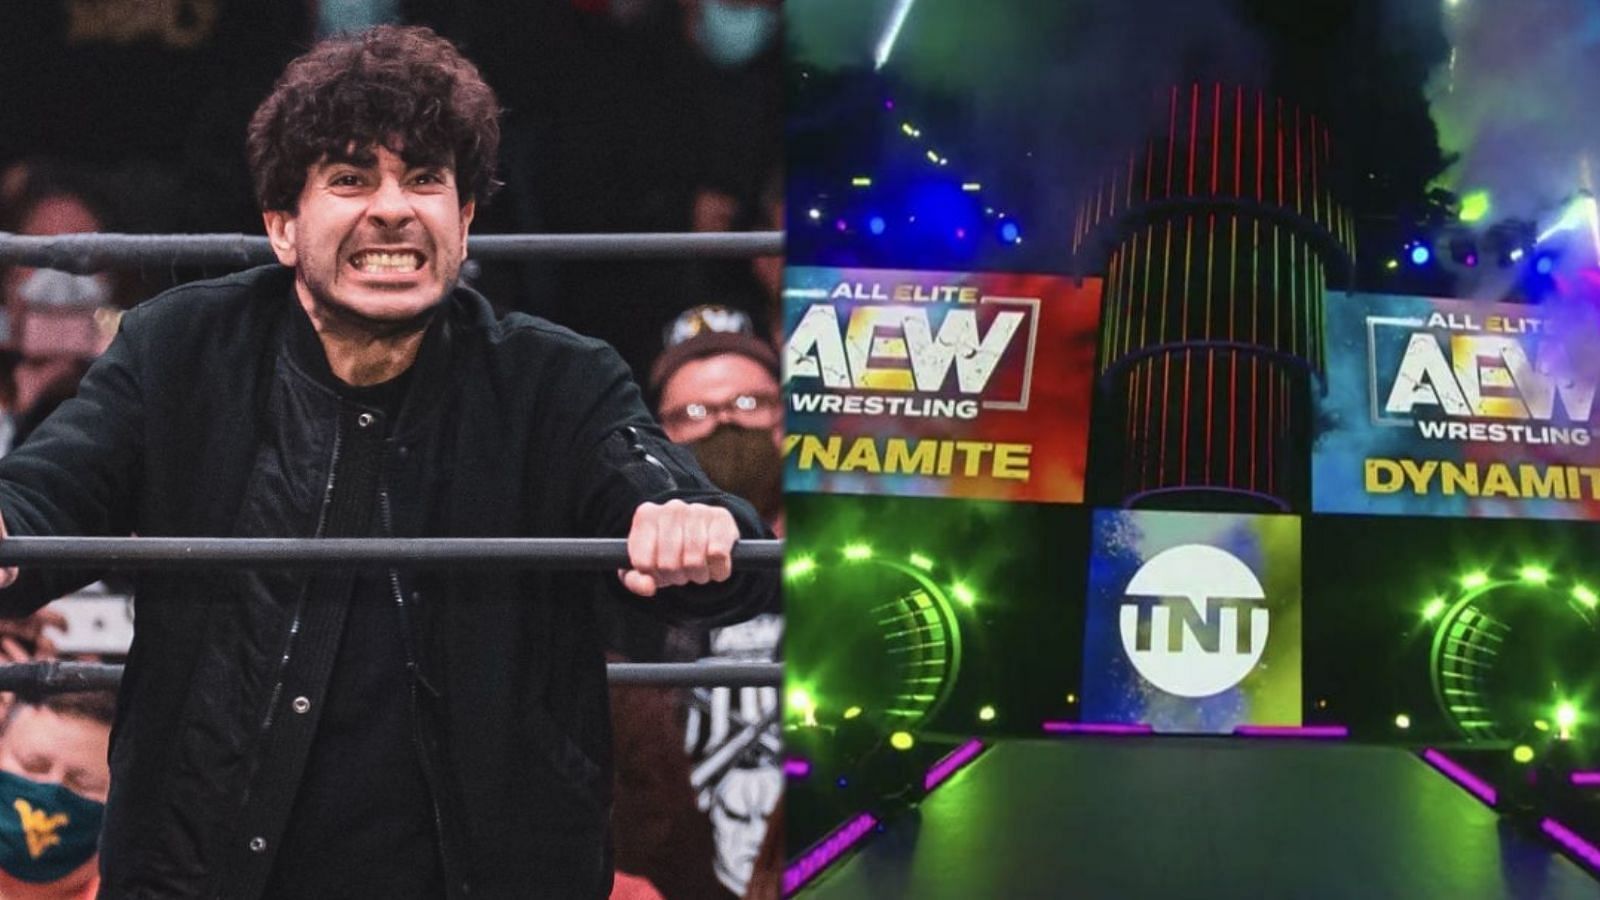 Tony Khan has the final say on booking in AEW.